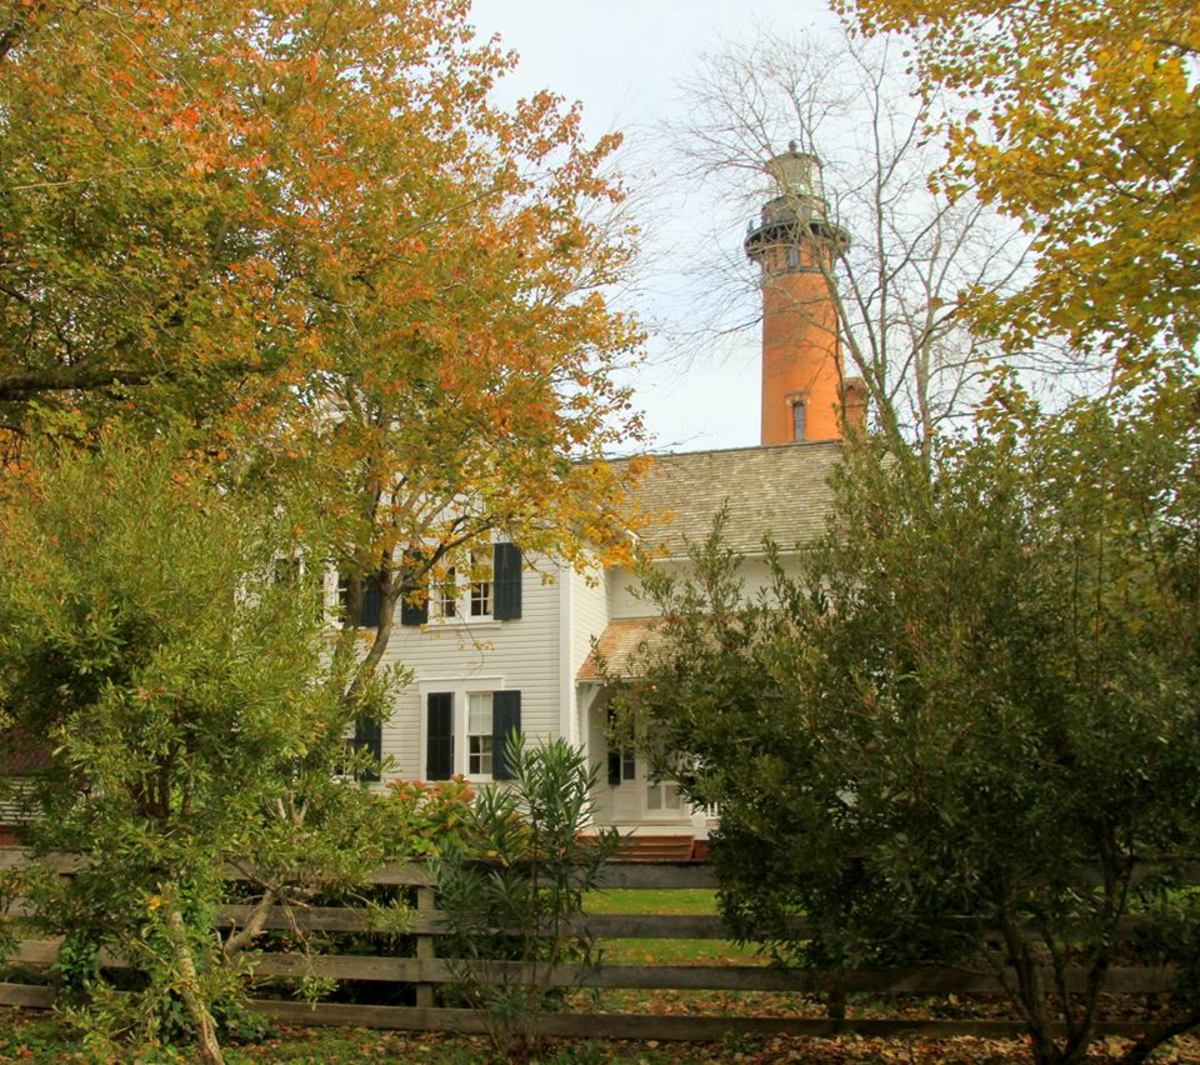 The Currituck Light and keeper's house